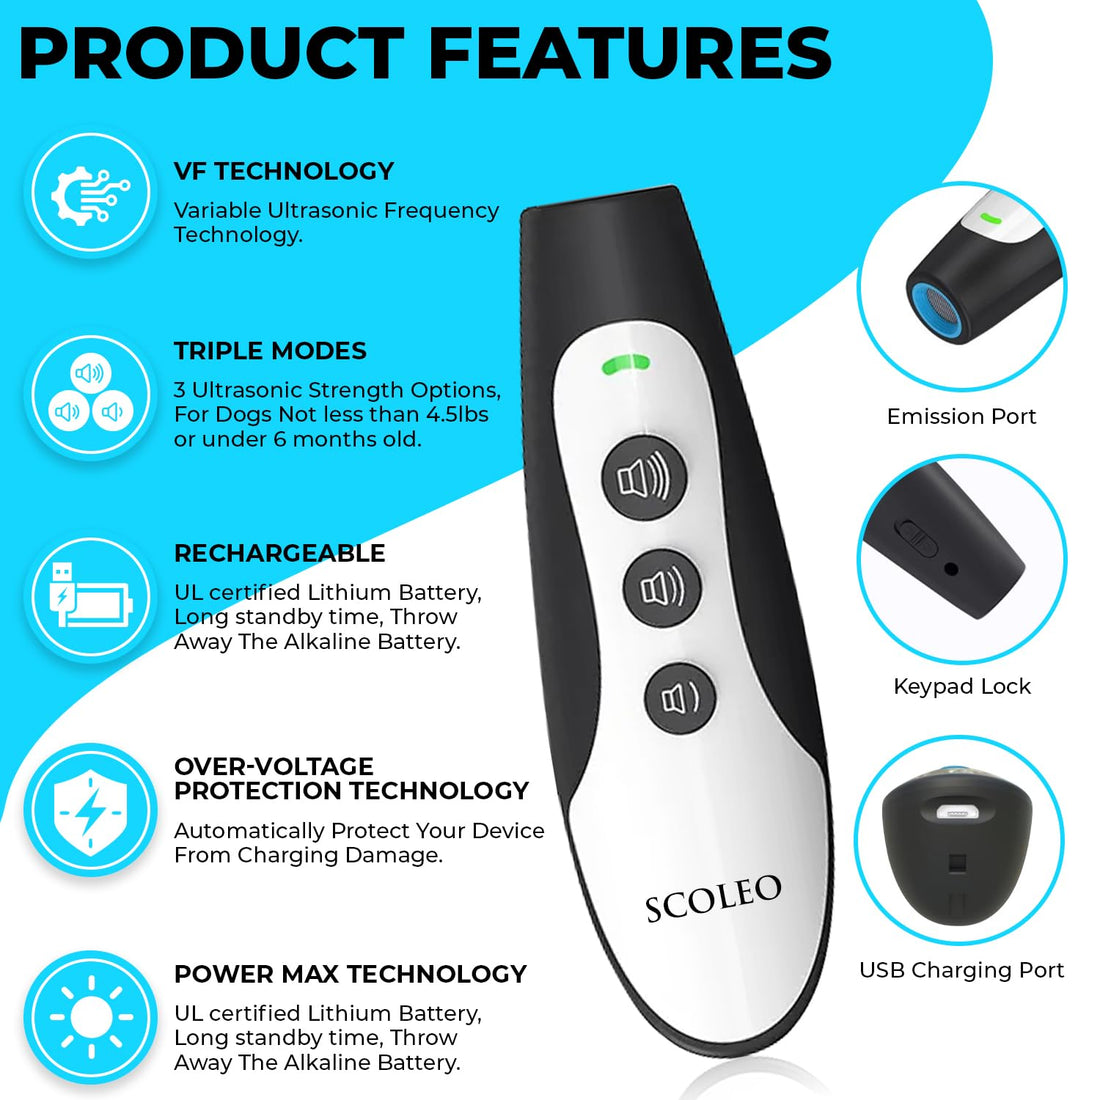 SCOLEO Ultrasonic Dog Barking Control Device for Home – Advanced Dog Ultrasonic Anti Barking Device – Effective Dog Training Tools with 3 Sound Levels - Variable Ultrasonic Frequency Technology